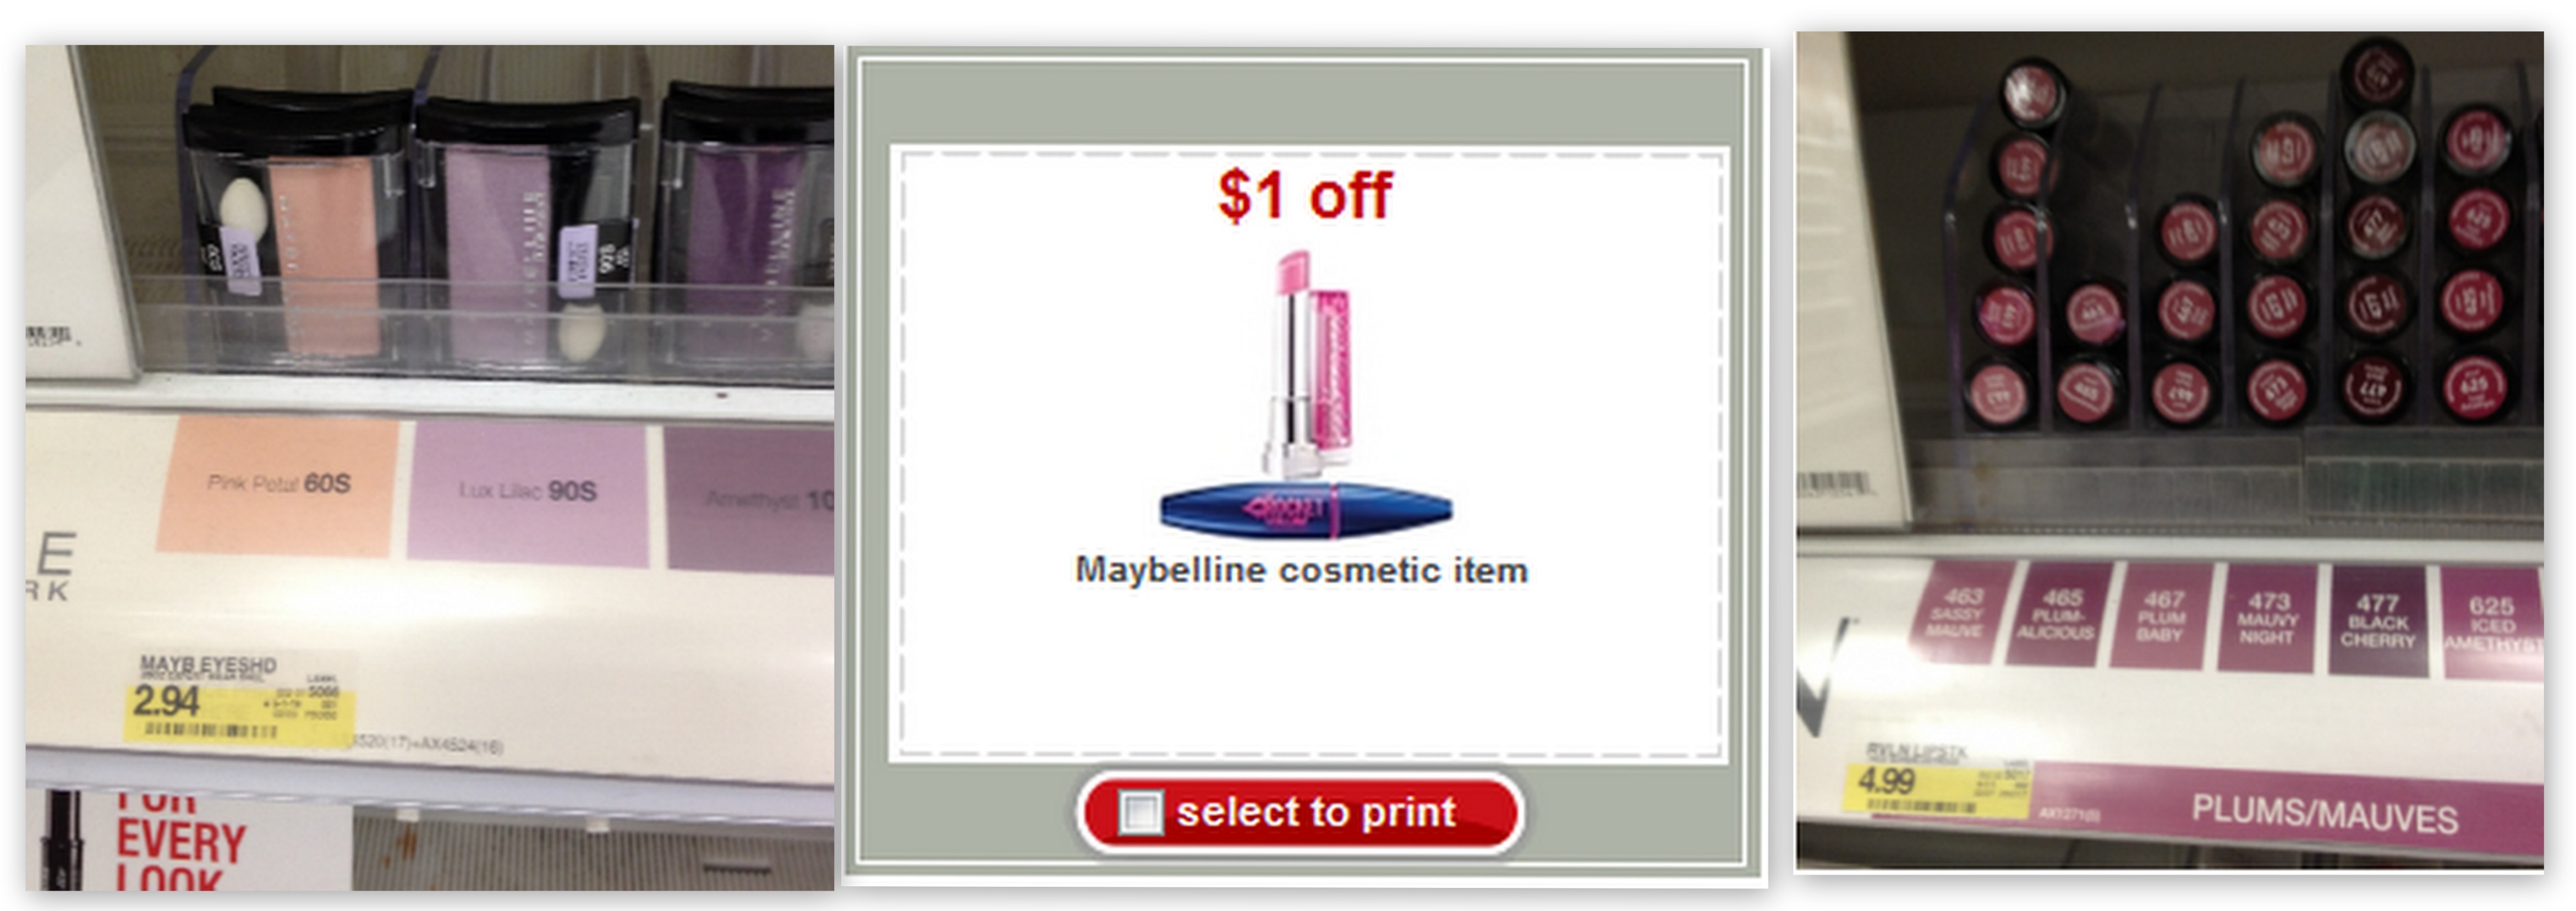 Maybelline Cosmetic Printable Coupons + Target Deals